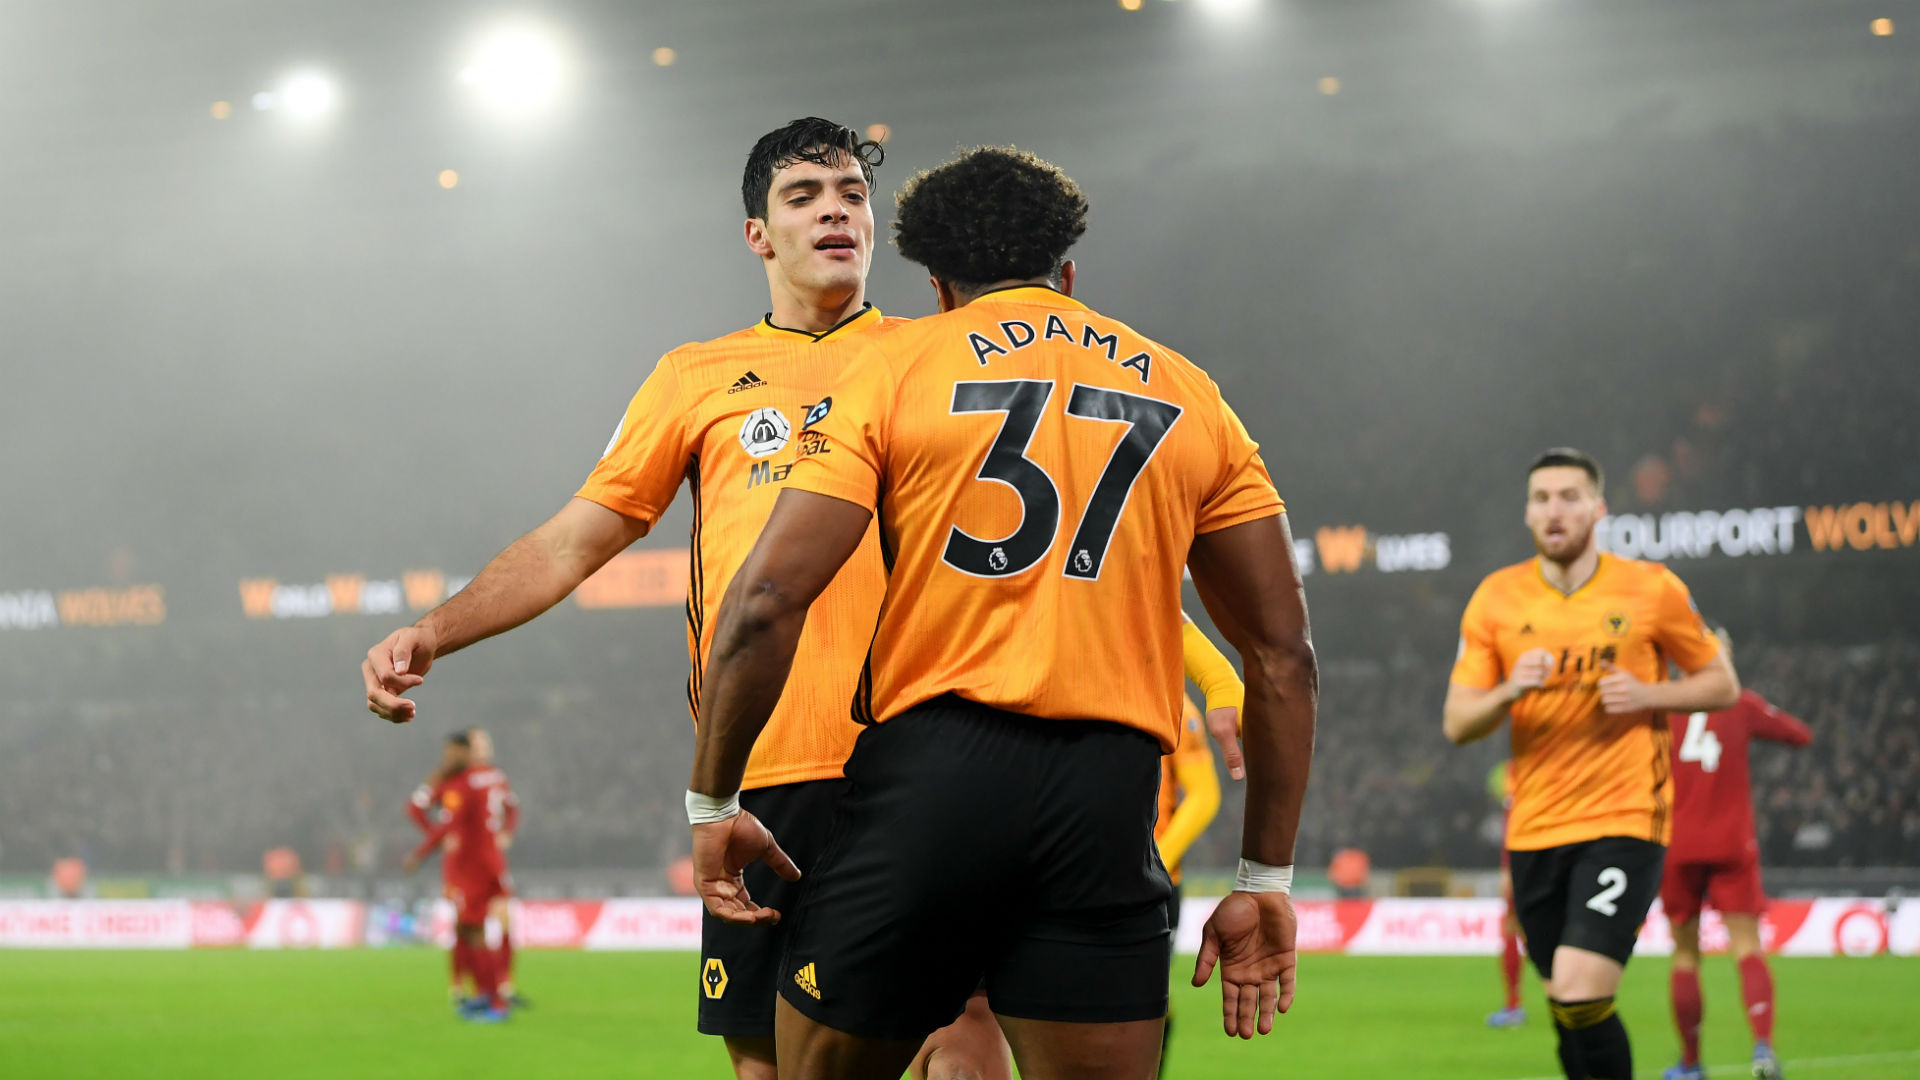 Traore and Jimenez solid partnership continues in Wolves victory over Bournemouth